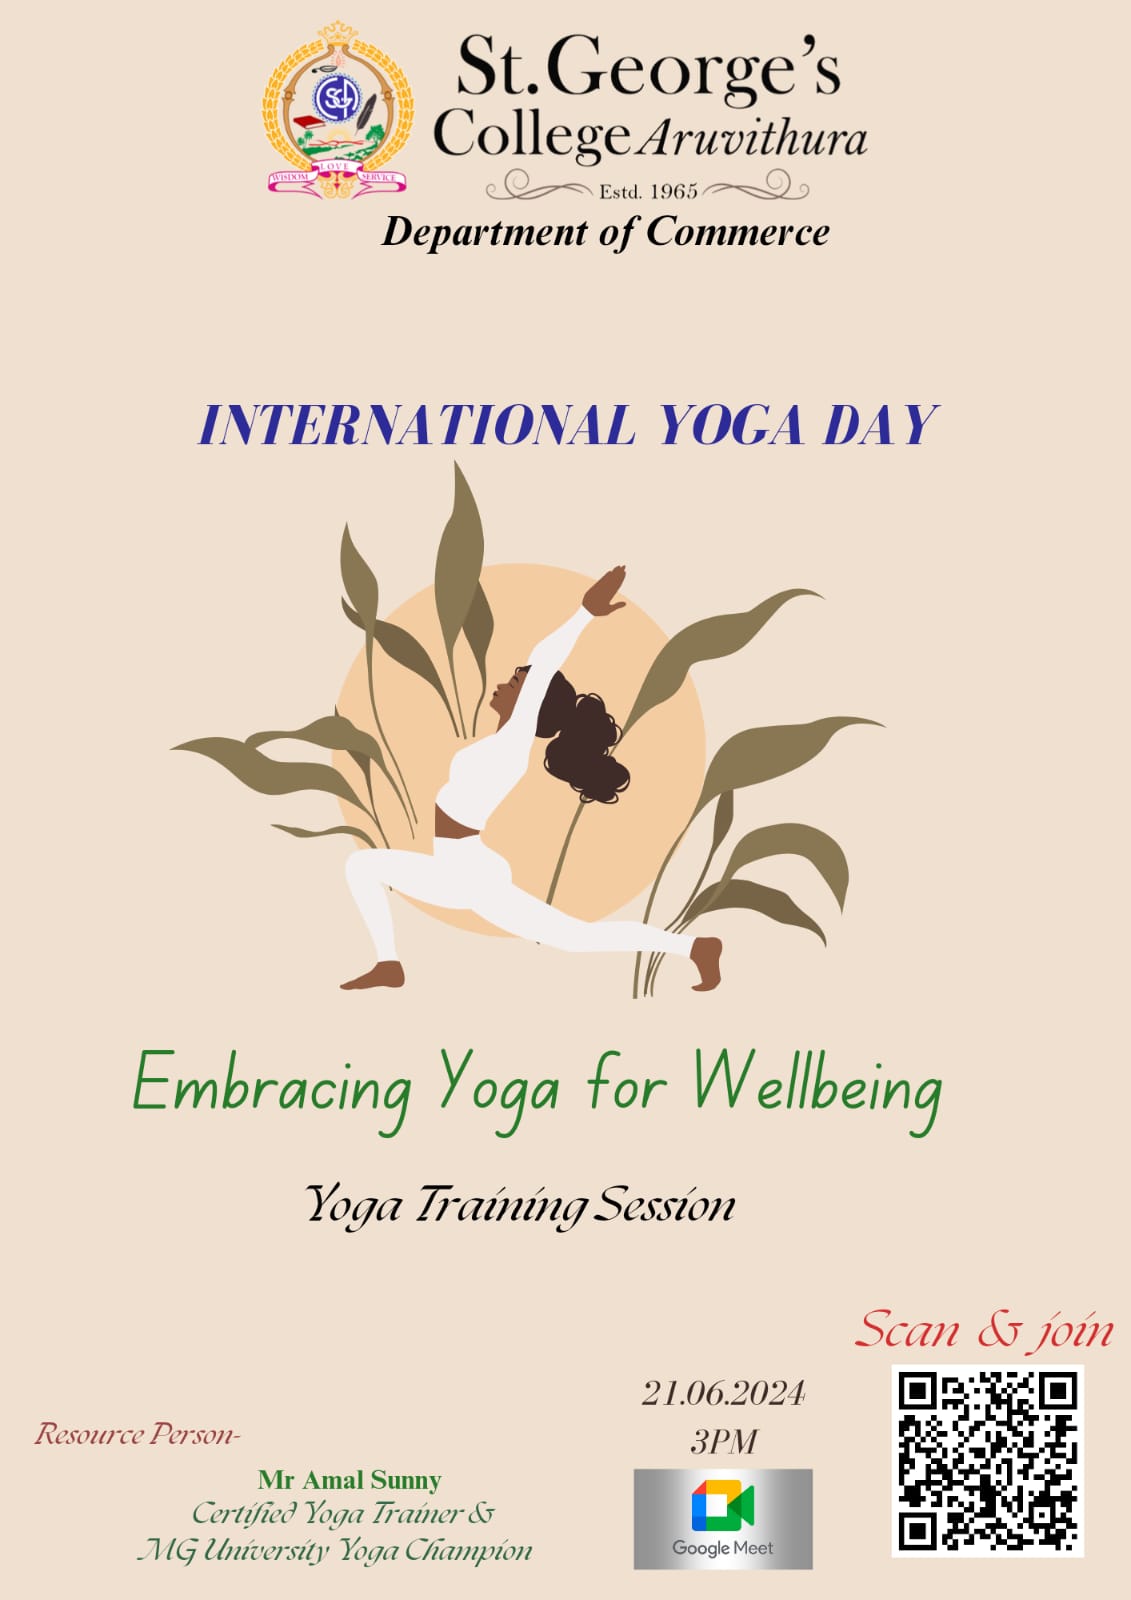 Yoga Training Sessions - Commerce (Aided)